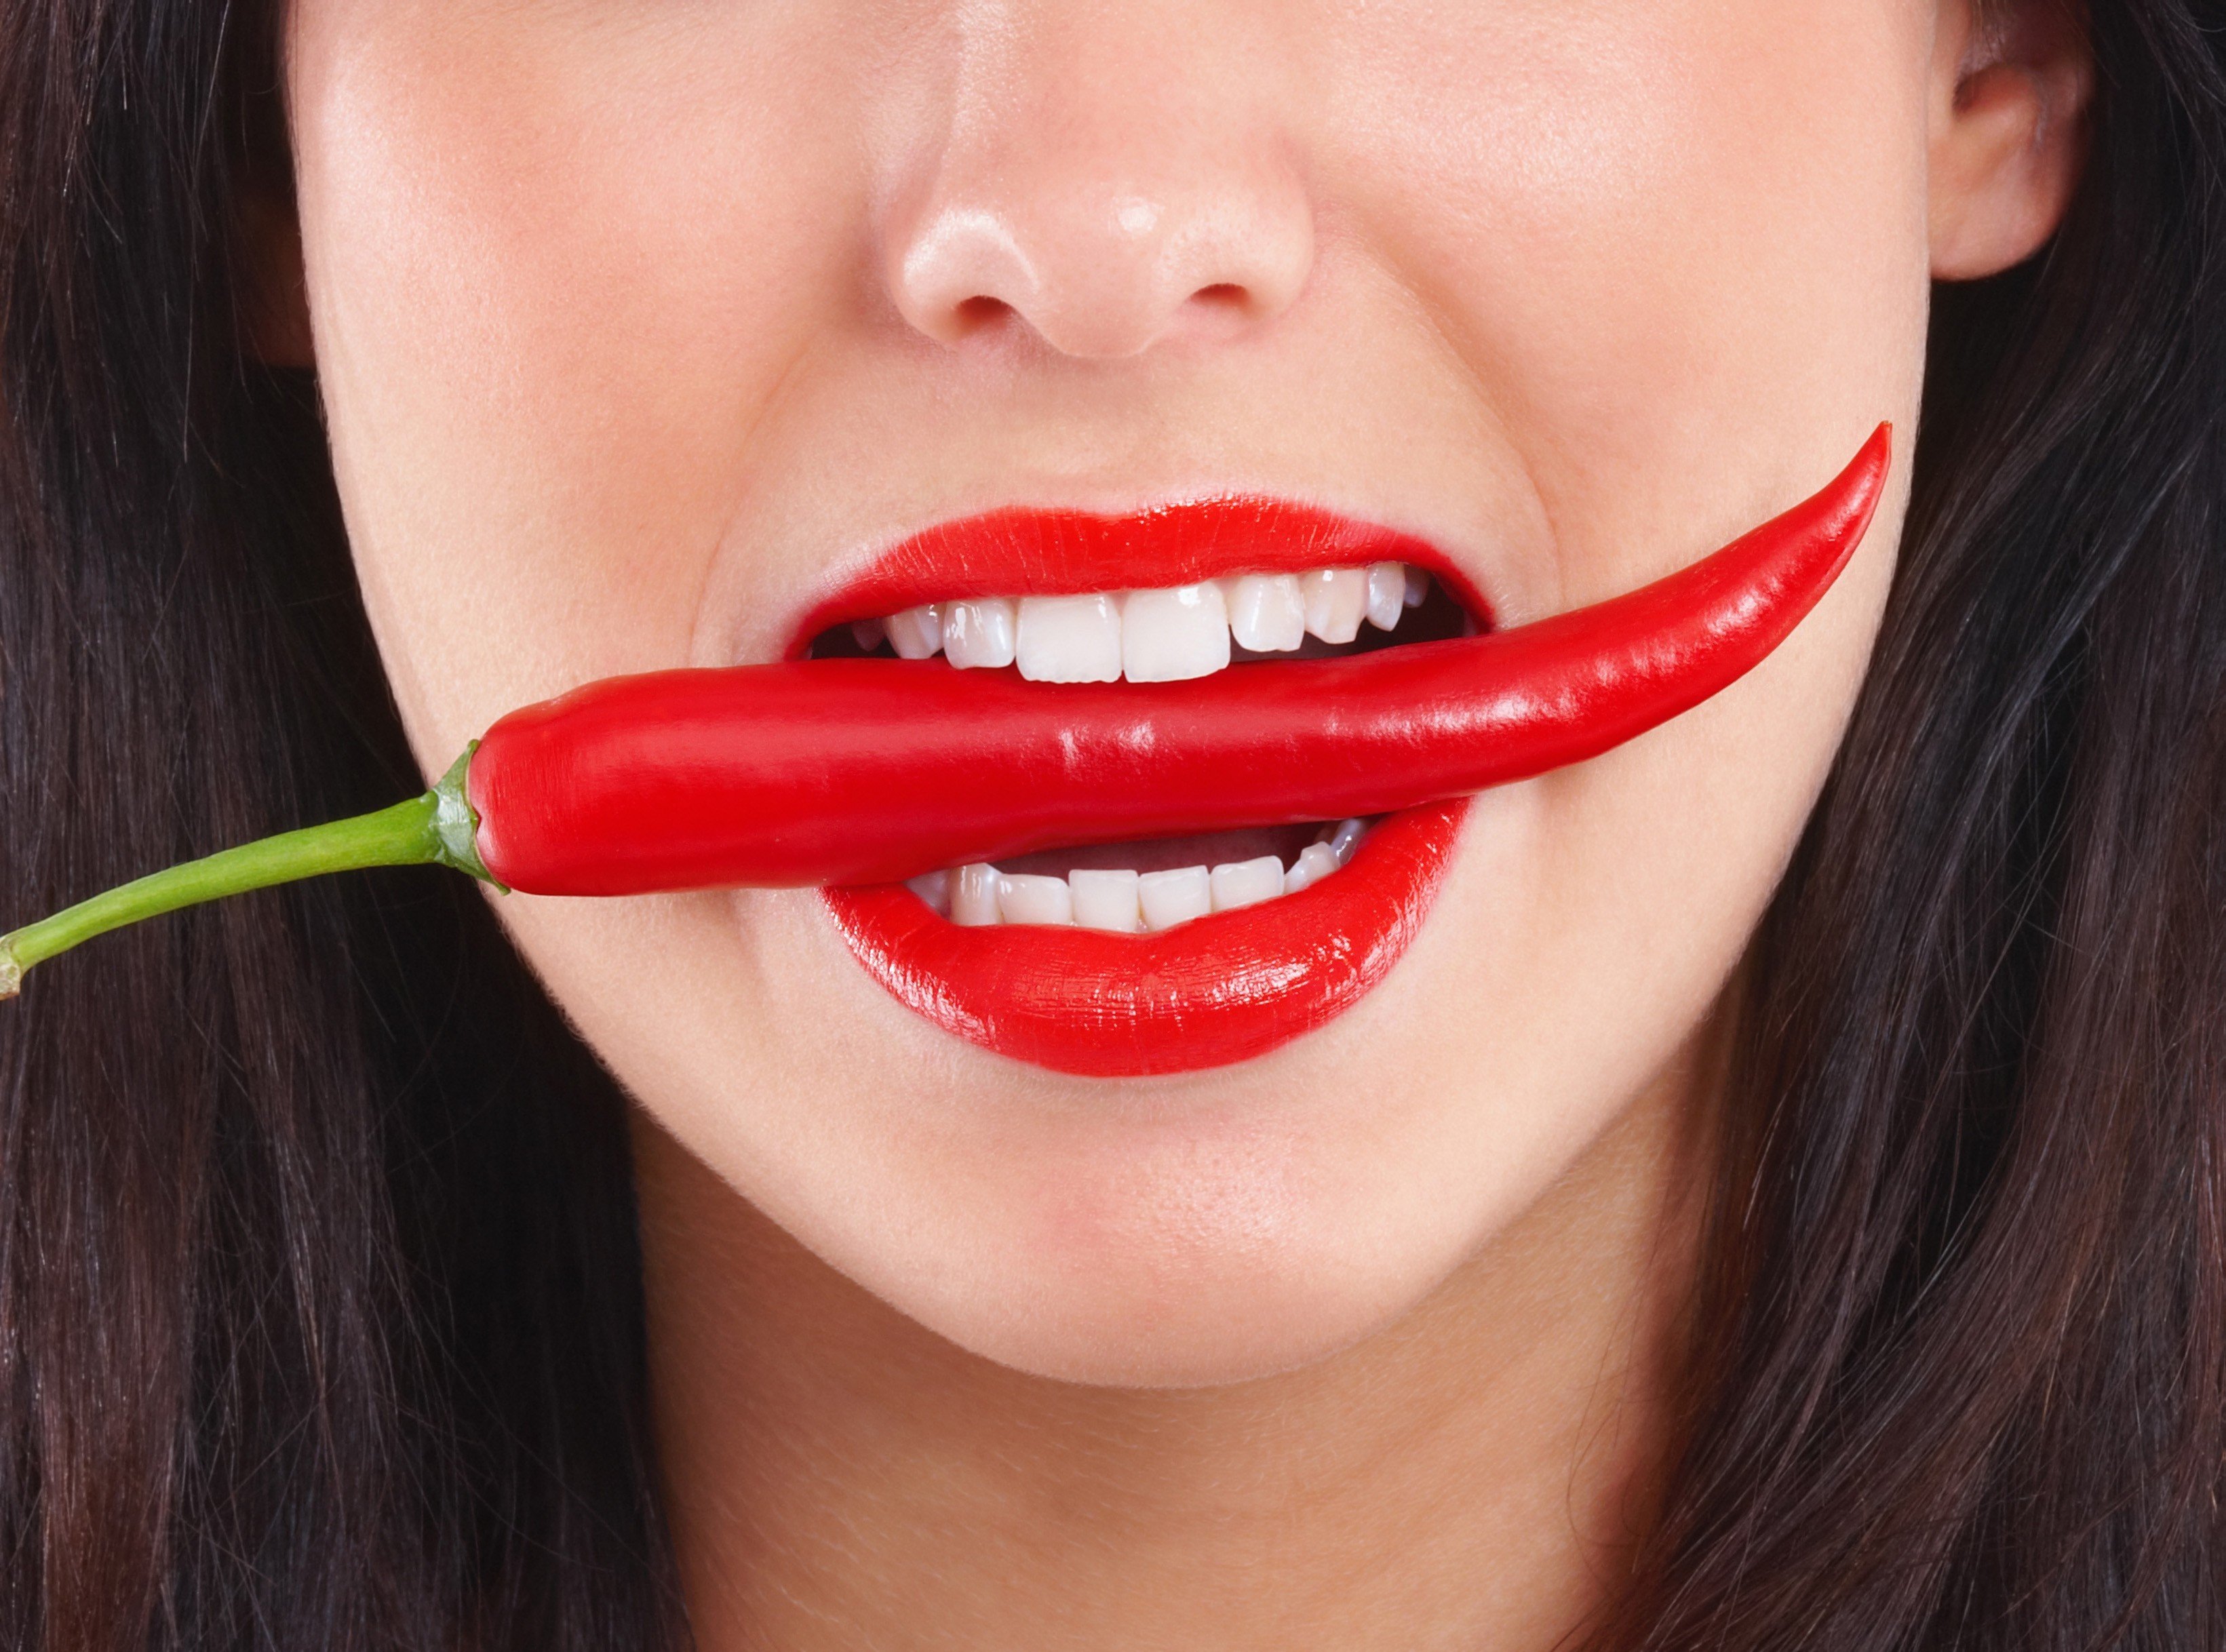 chilli peppers, Juicy lips HD Wallpapers / Desktop and Mobile Images